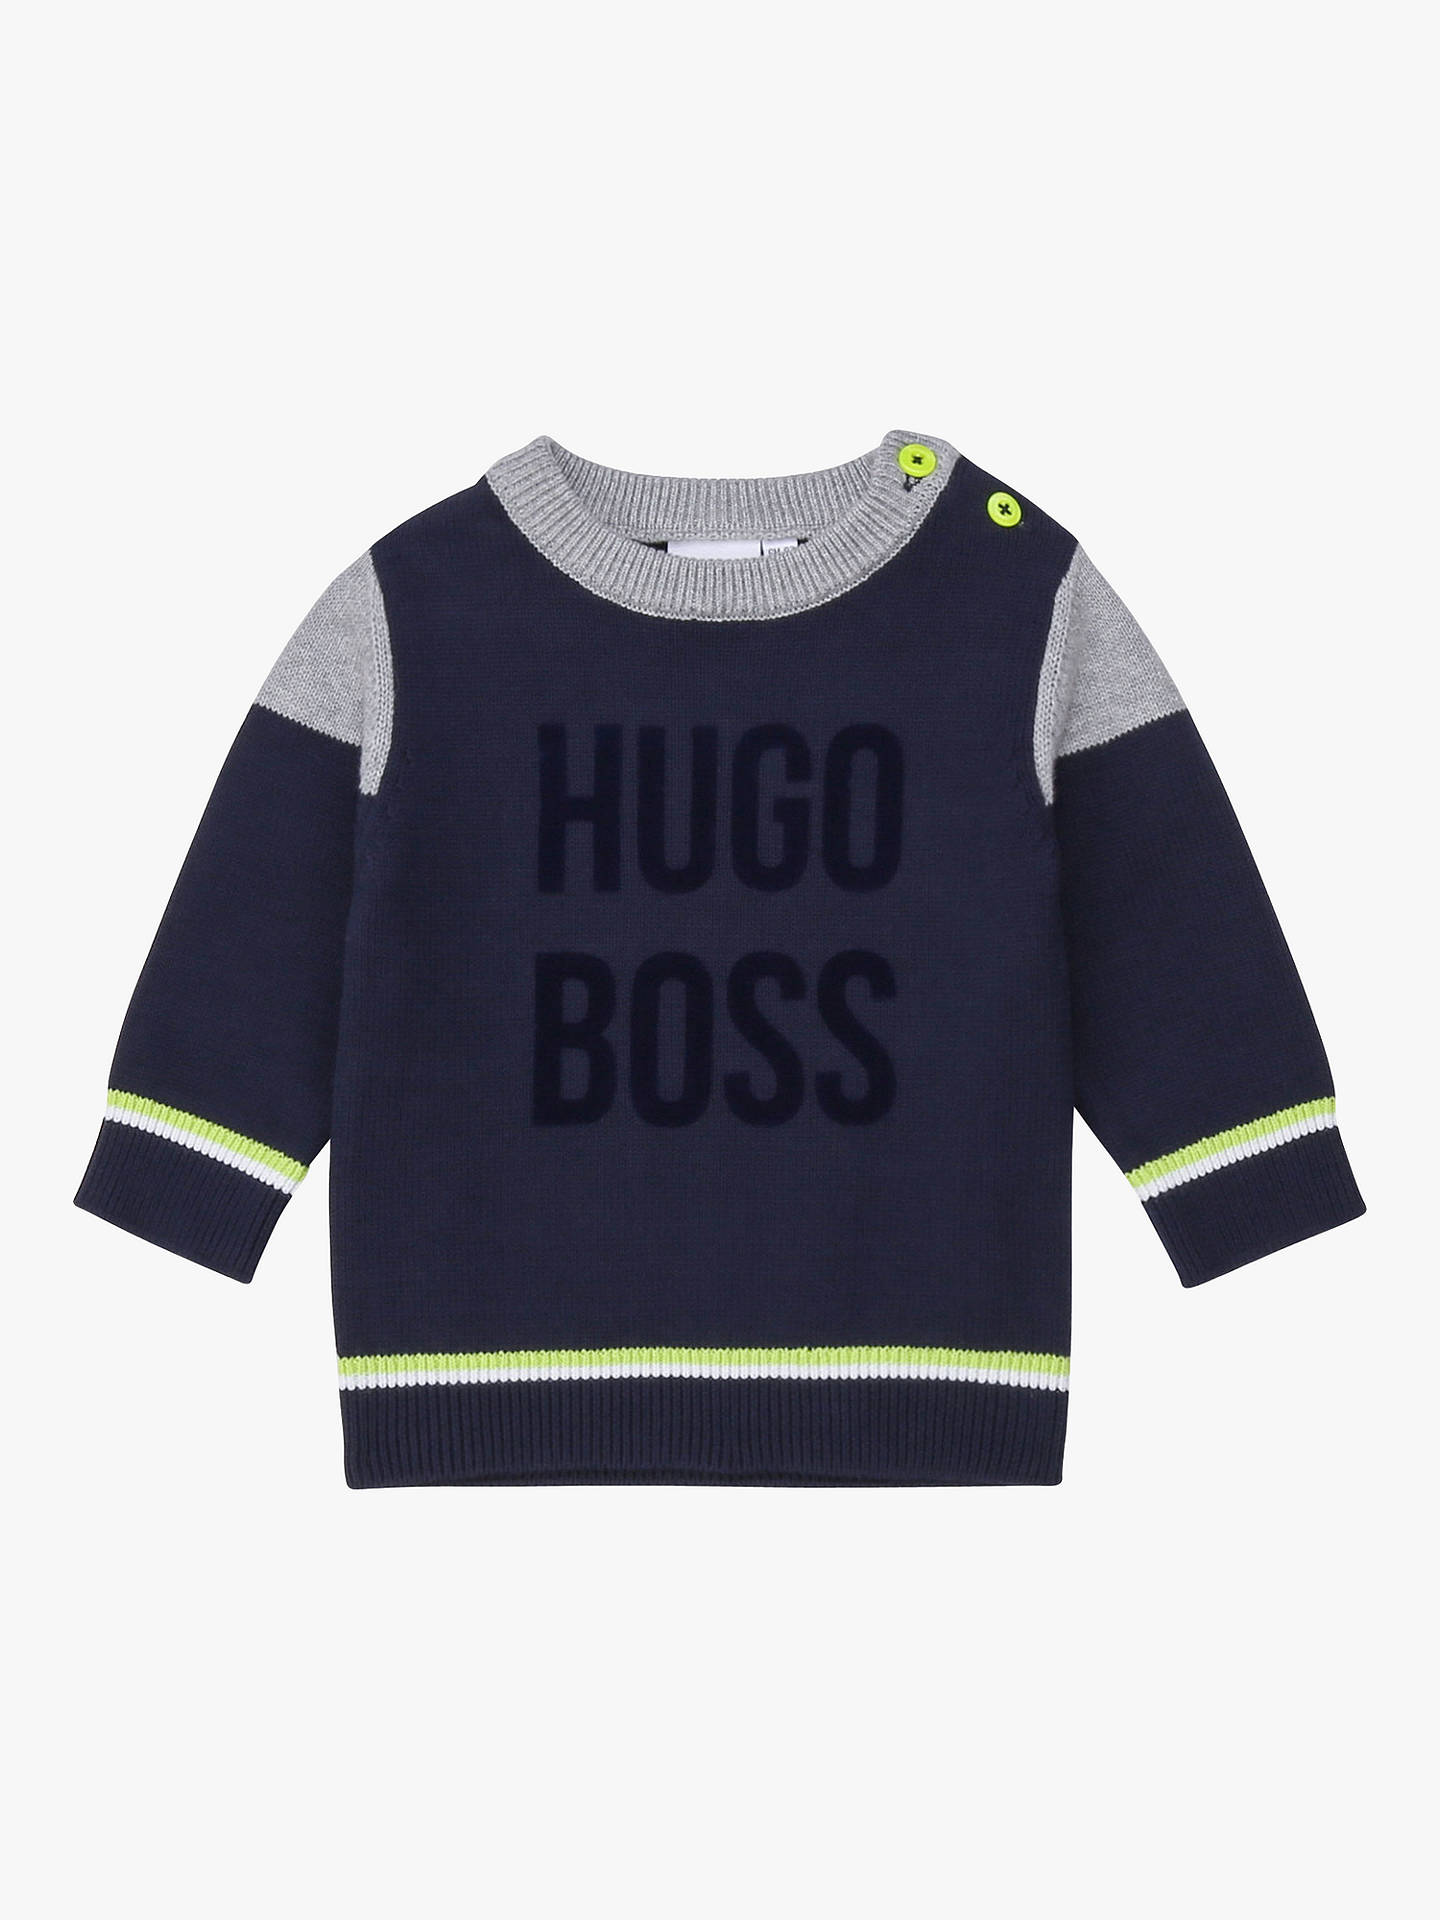 HUGO BOSS Baby Combed Cotton Knit Jumper, Navy at John Lewis & Partners